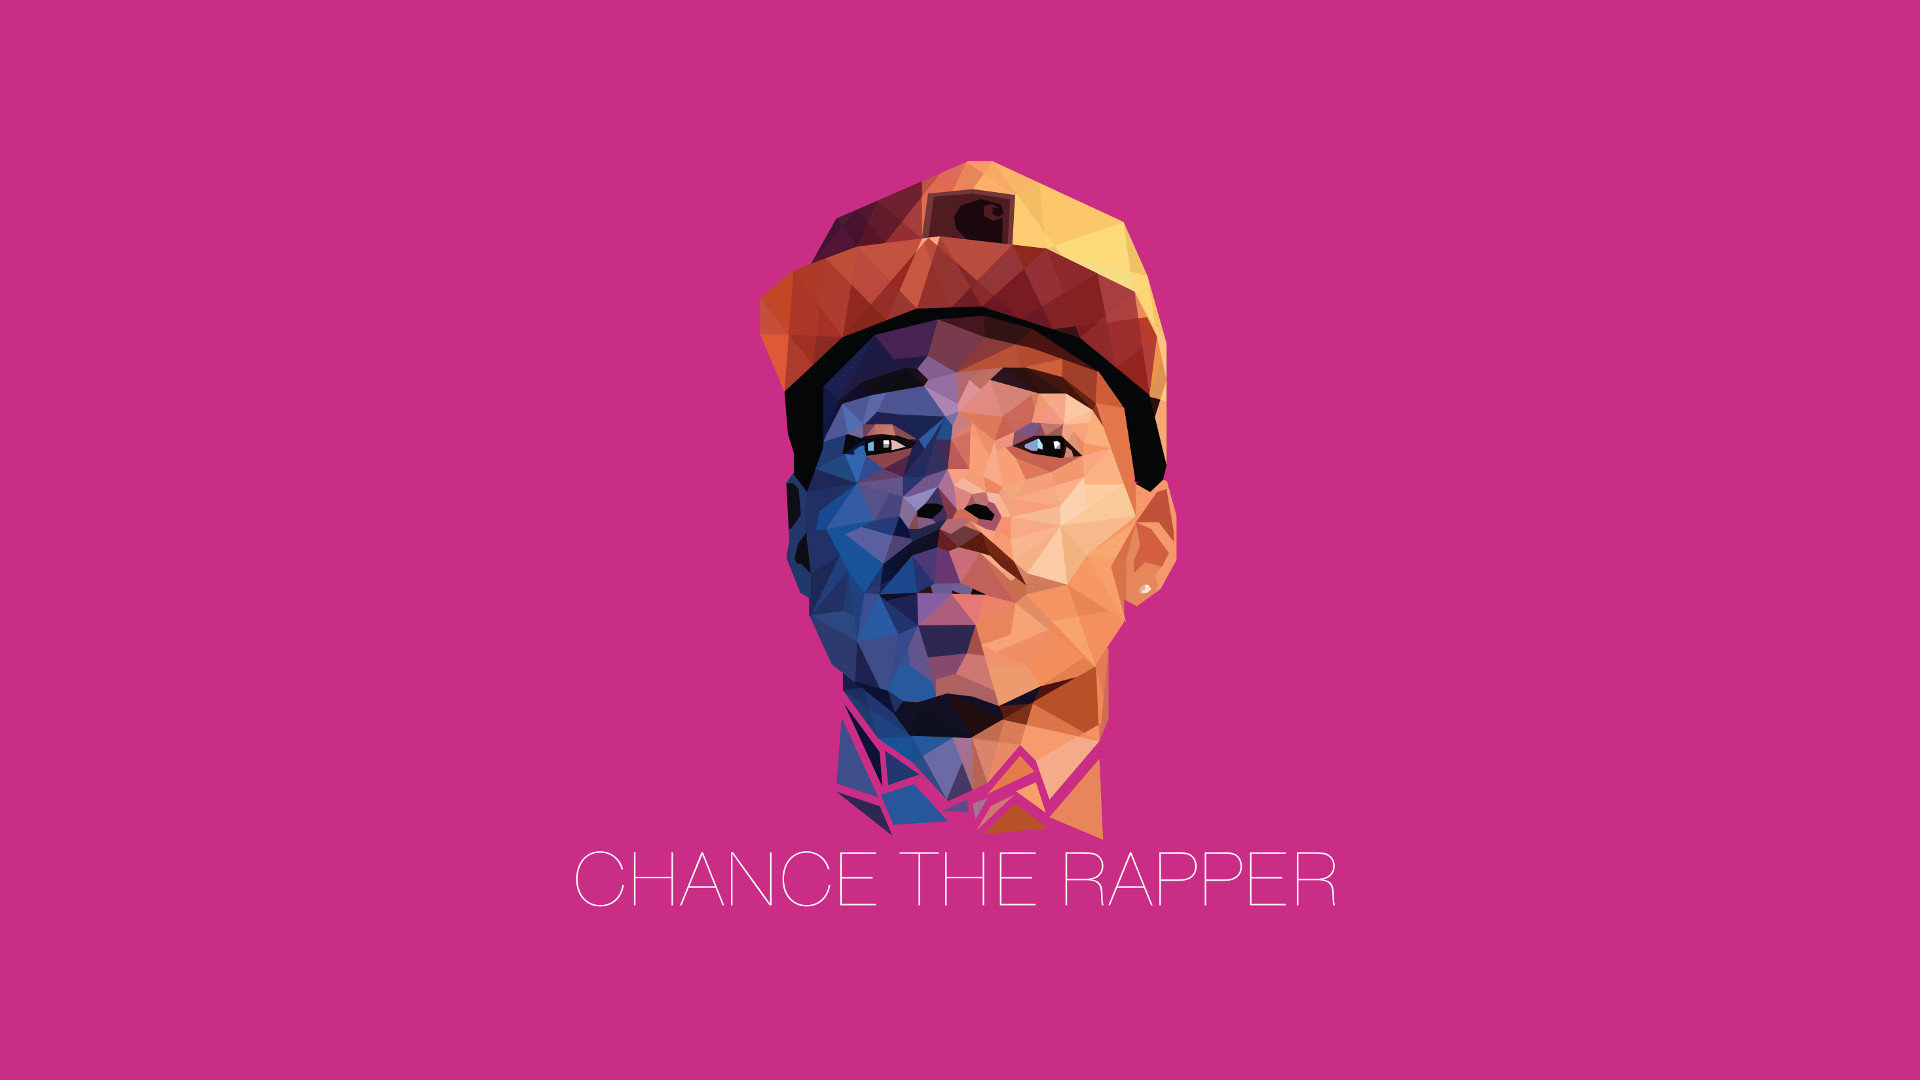 Download full hd 1920x1080 Chance The Rapper computer wallpaper ID:193311 for free